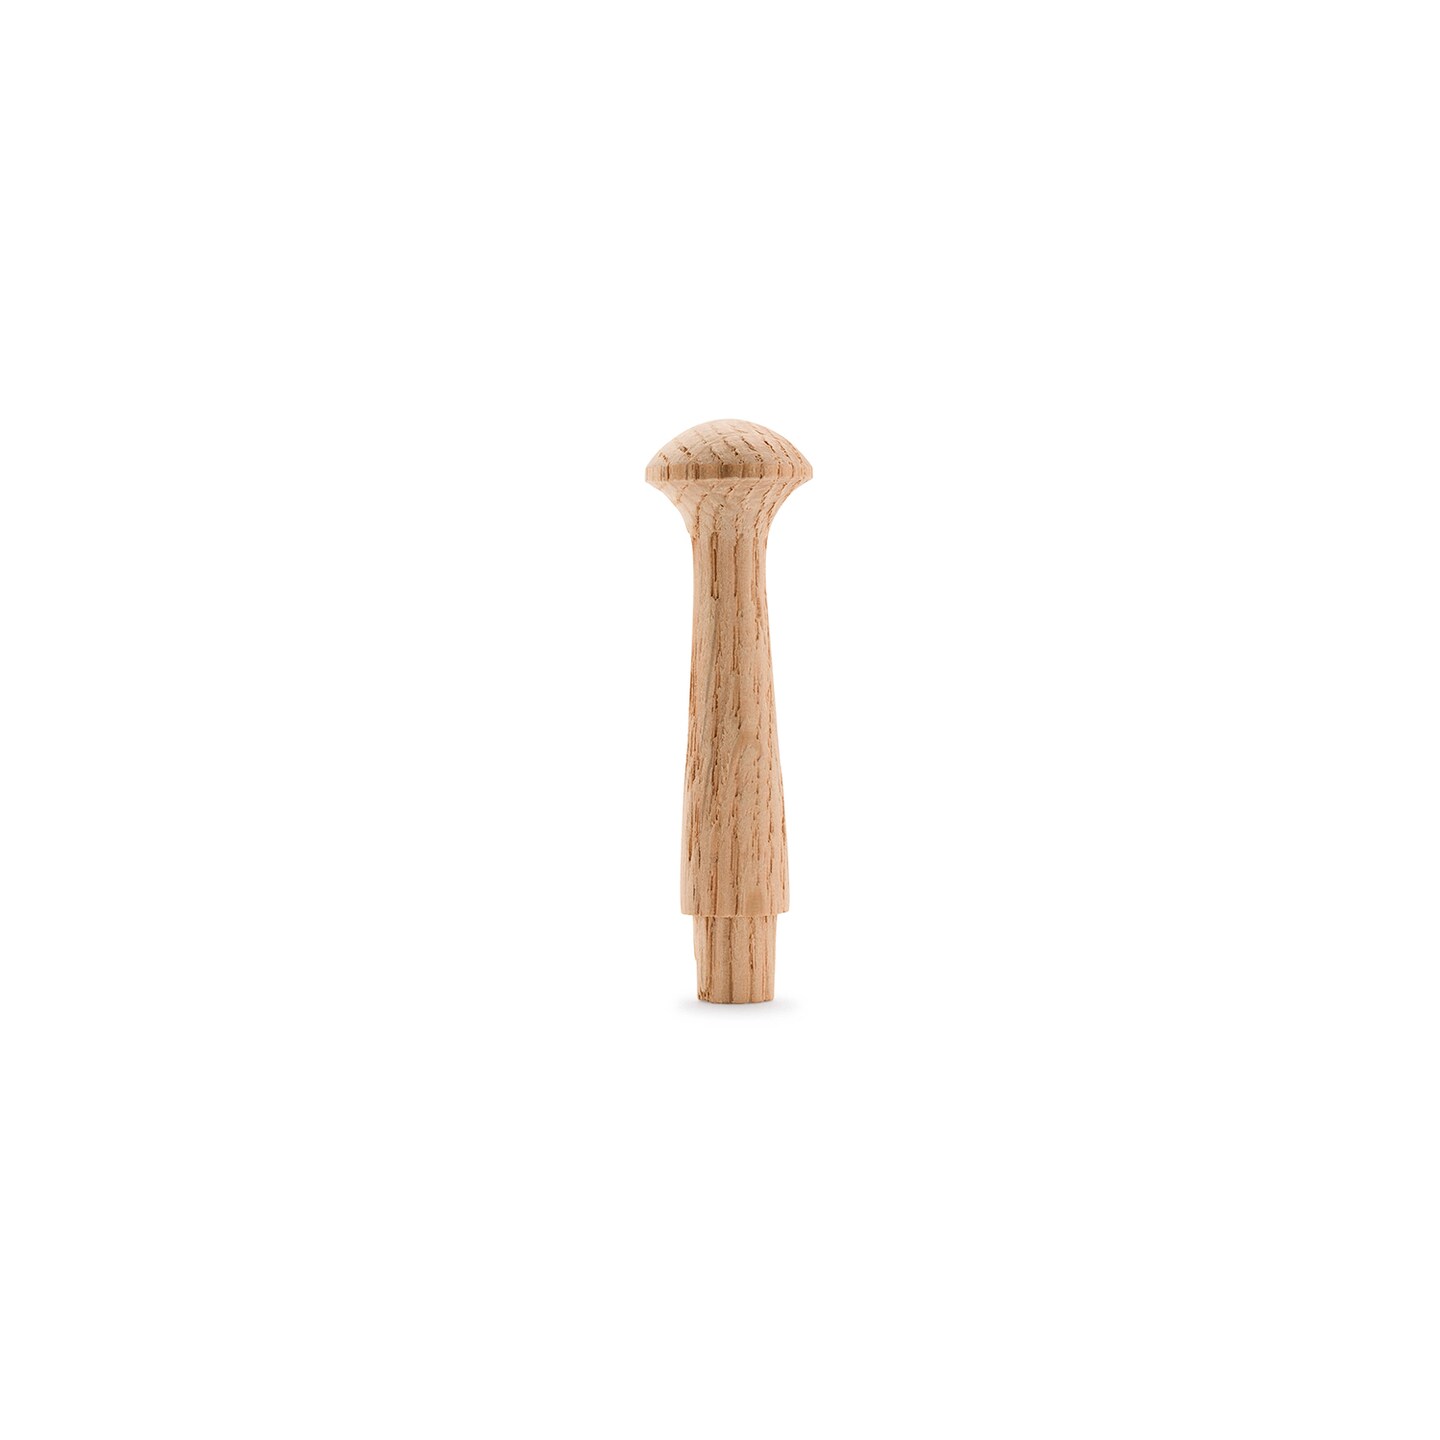 Oak Shaker Peg, Multiple Sizes Available, Wooden Pegs for Wall Hanging | Woodpeckers